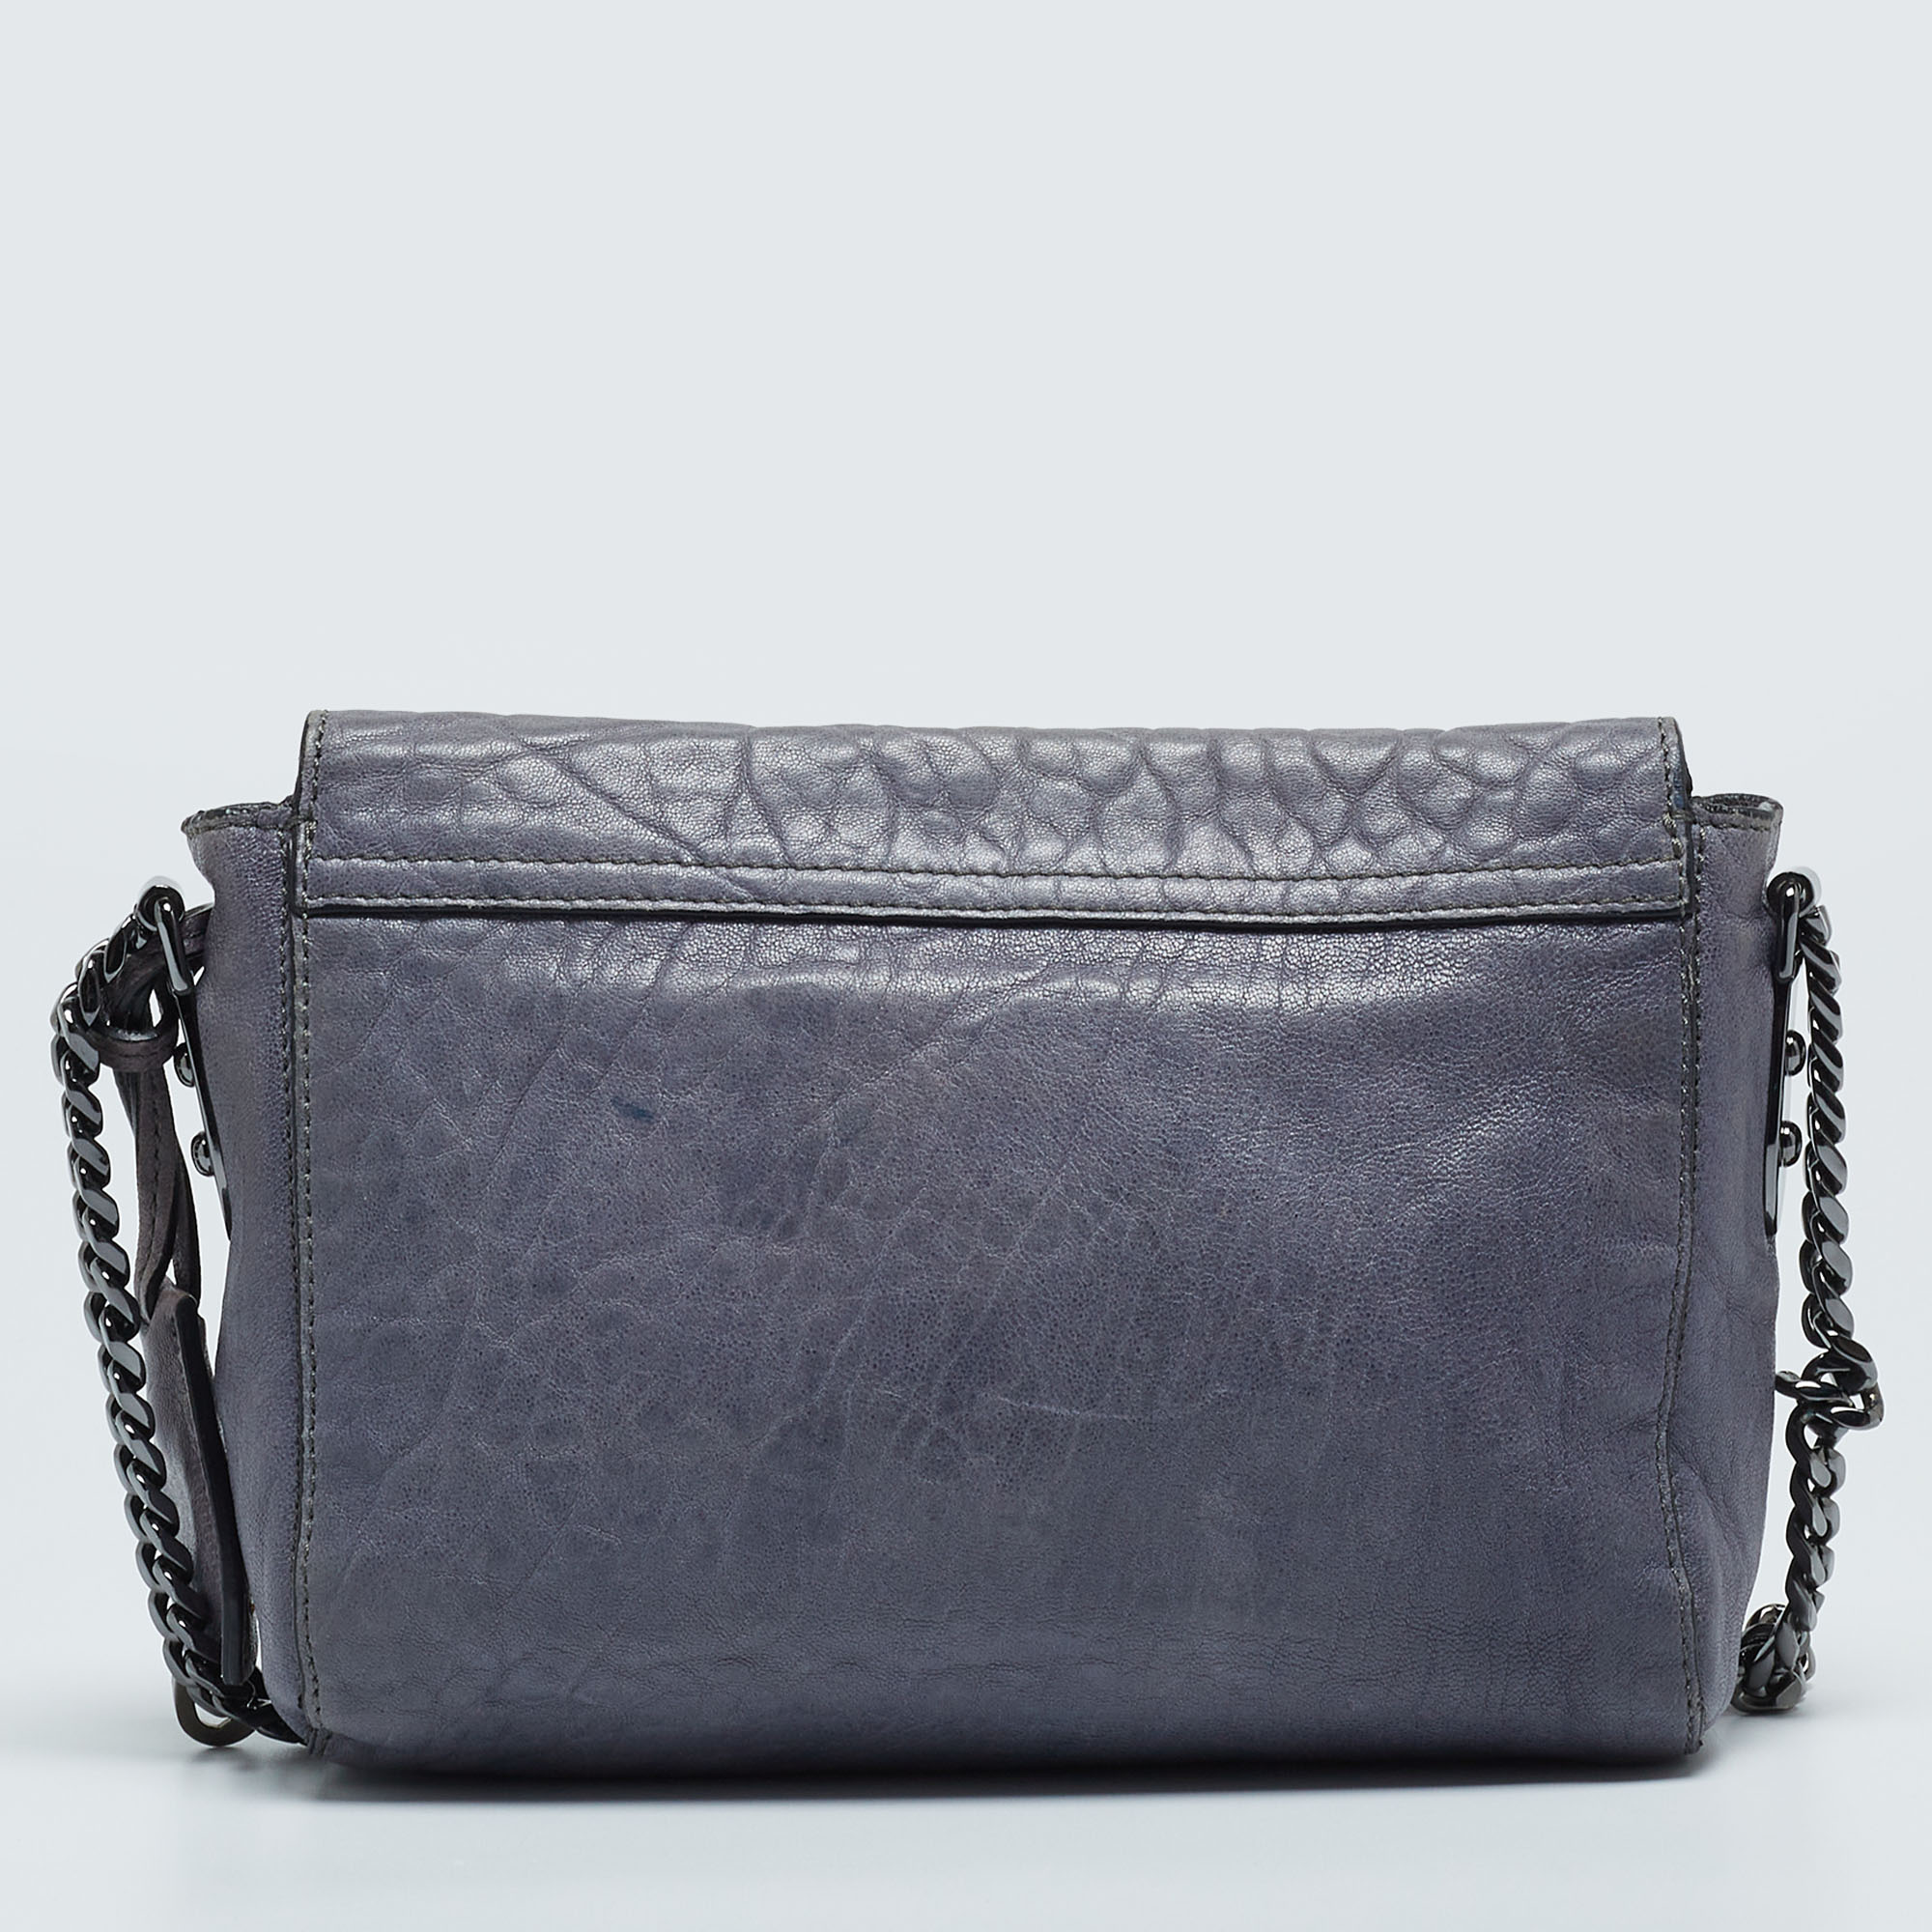 Mulberry Blue Leather Lily Crossbody Bag